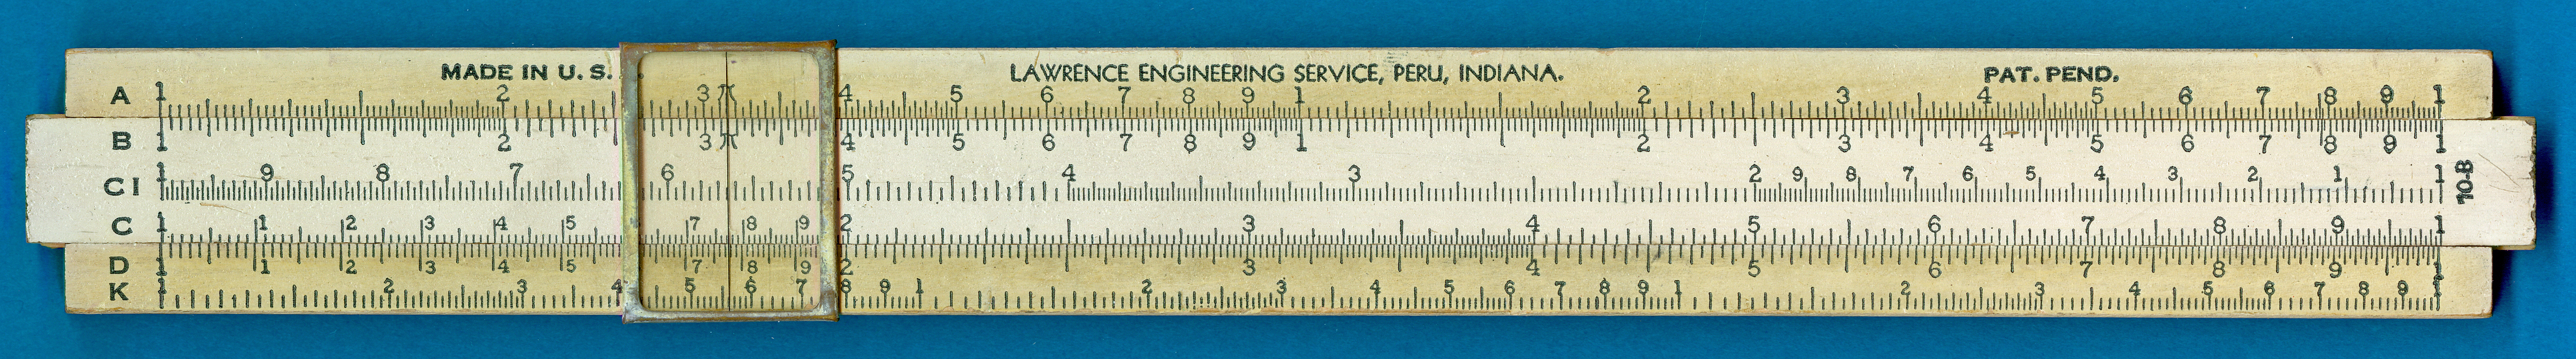 Lawrence Engineering Services 10-B standard